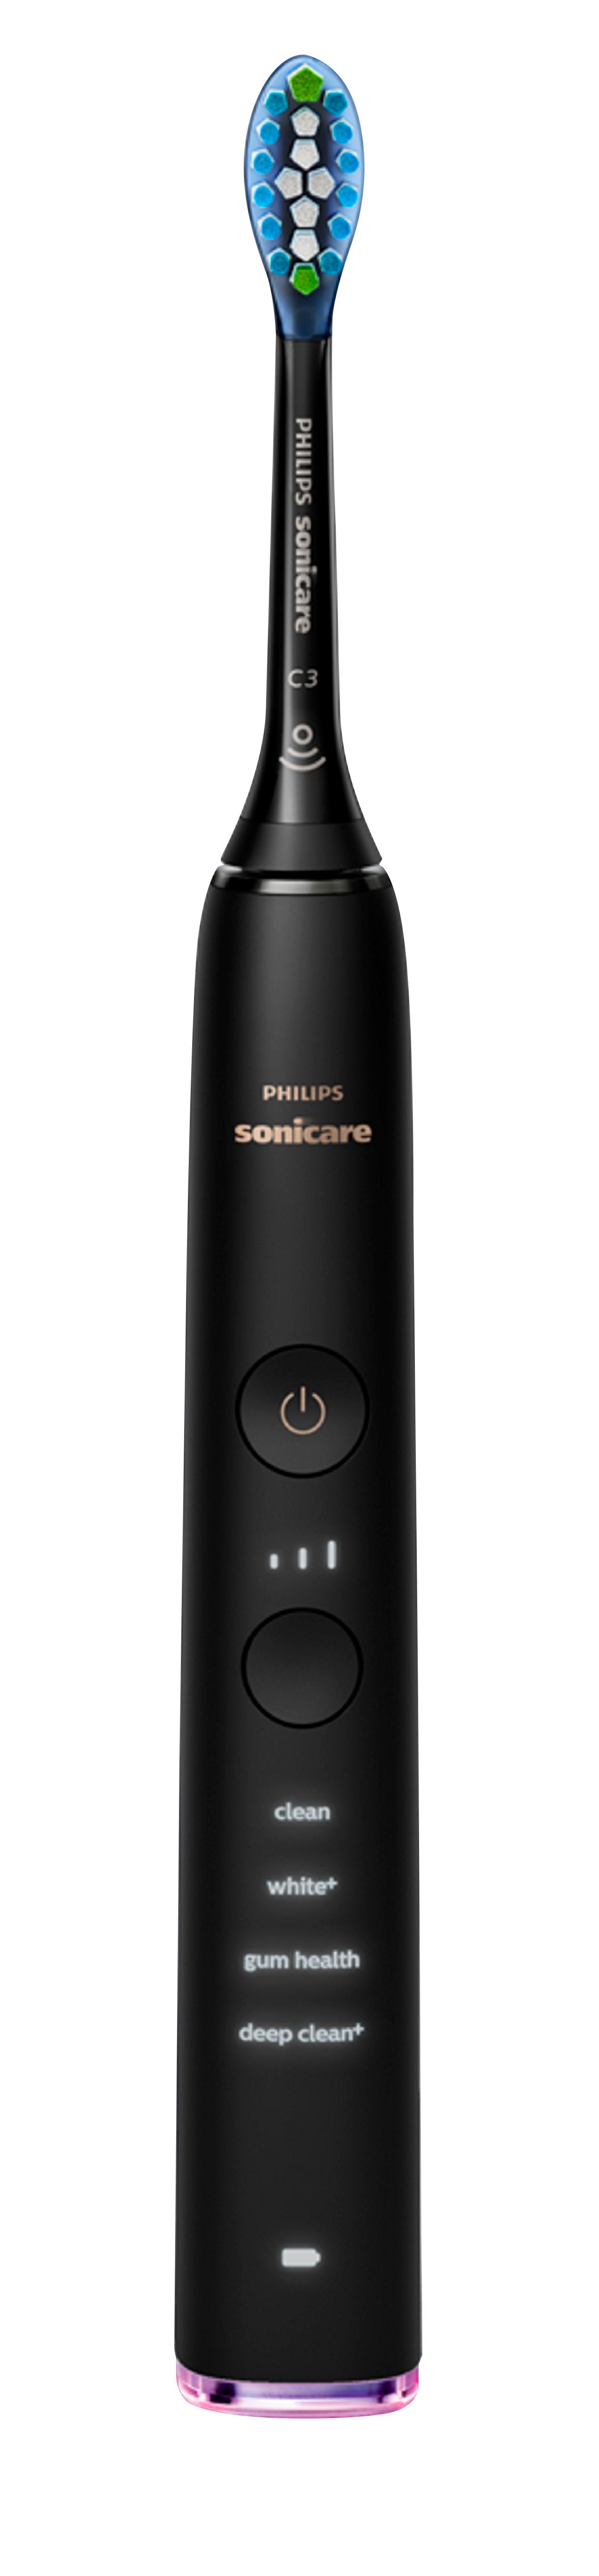 Philips Sonicare DiamondClean Smart 9300 Rechargeable Toothbrush